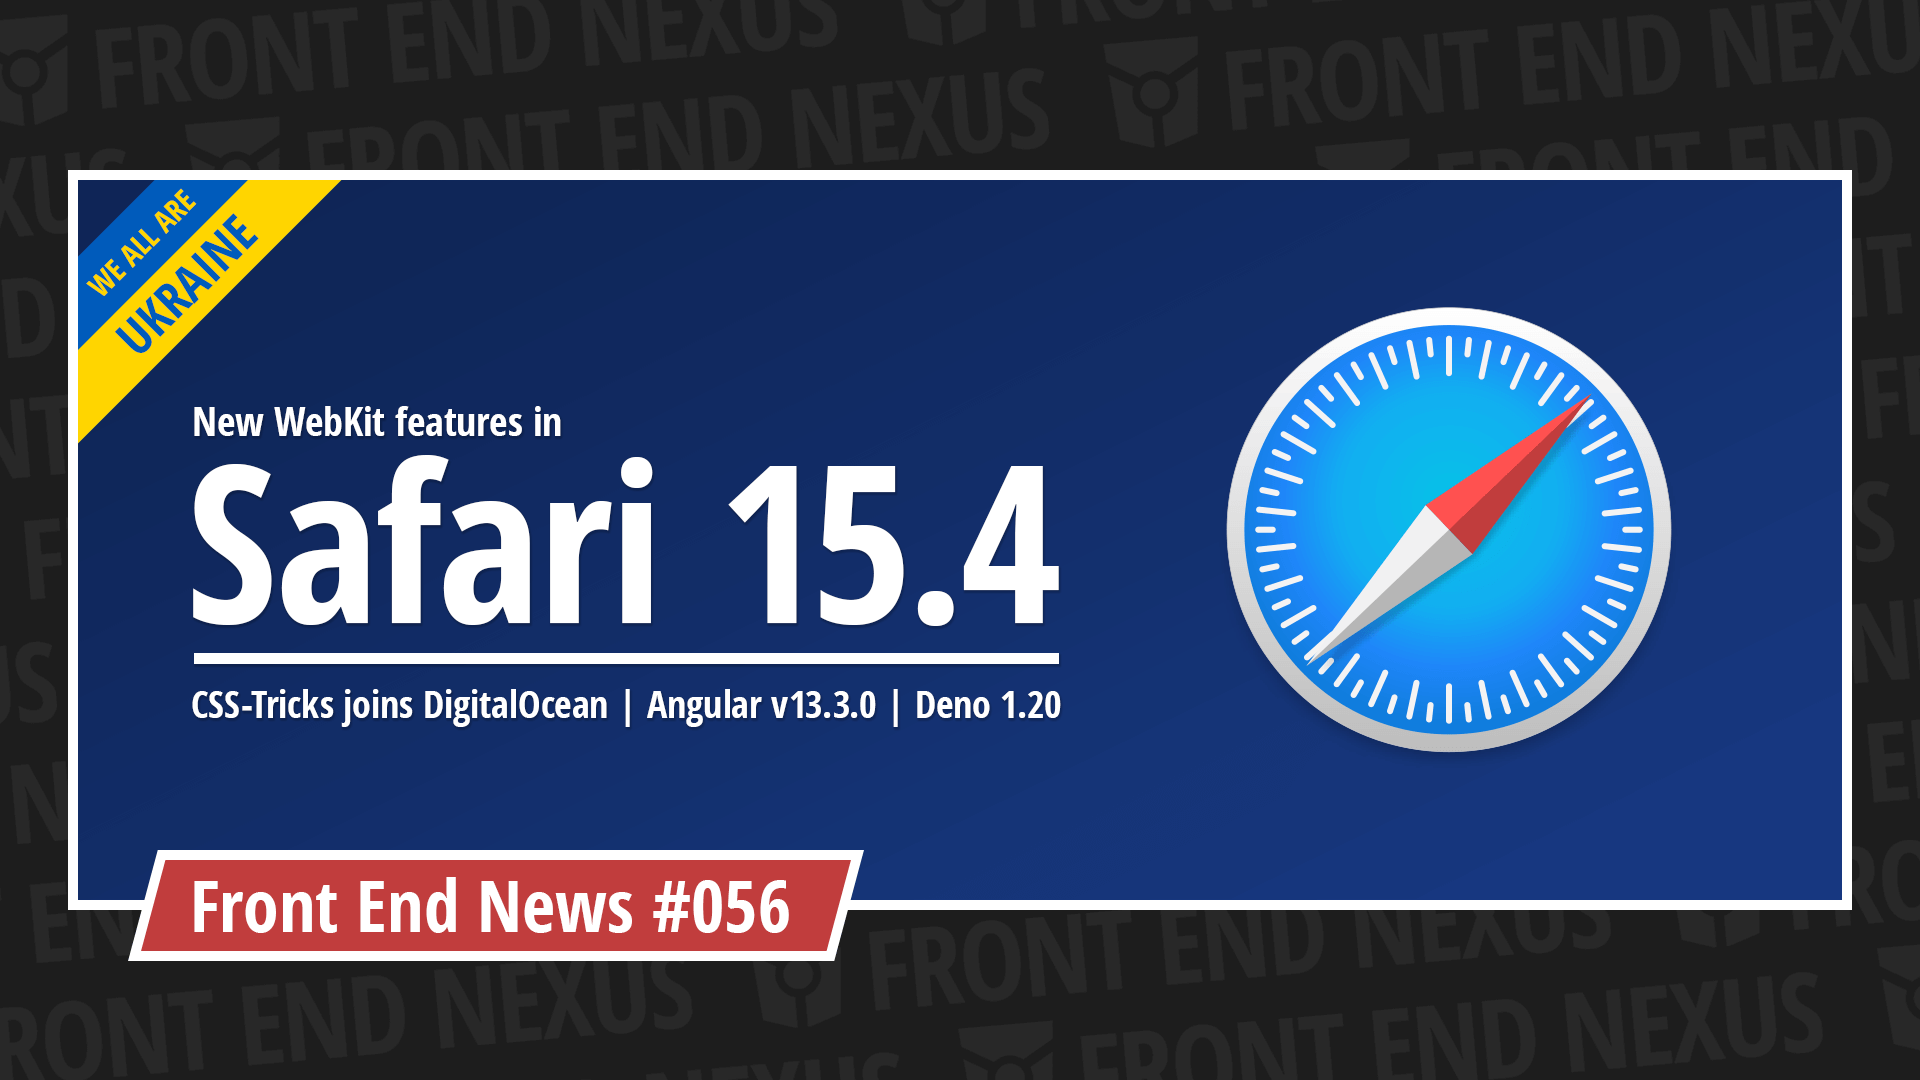 New WebKit Features in Safari 15.4, CSS-Tricks joins DigitalOcean, Angular v13.3.0, Deno 1.20, and more | Front End News #056